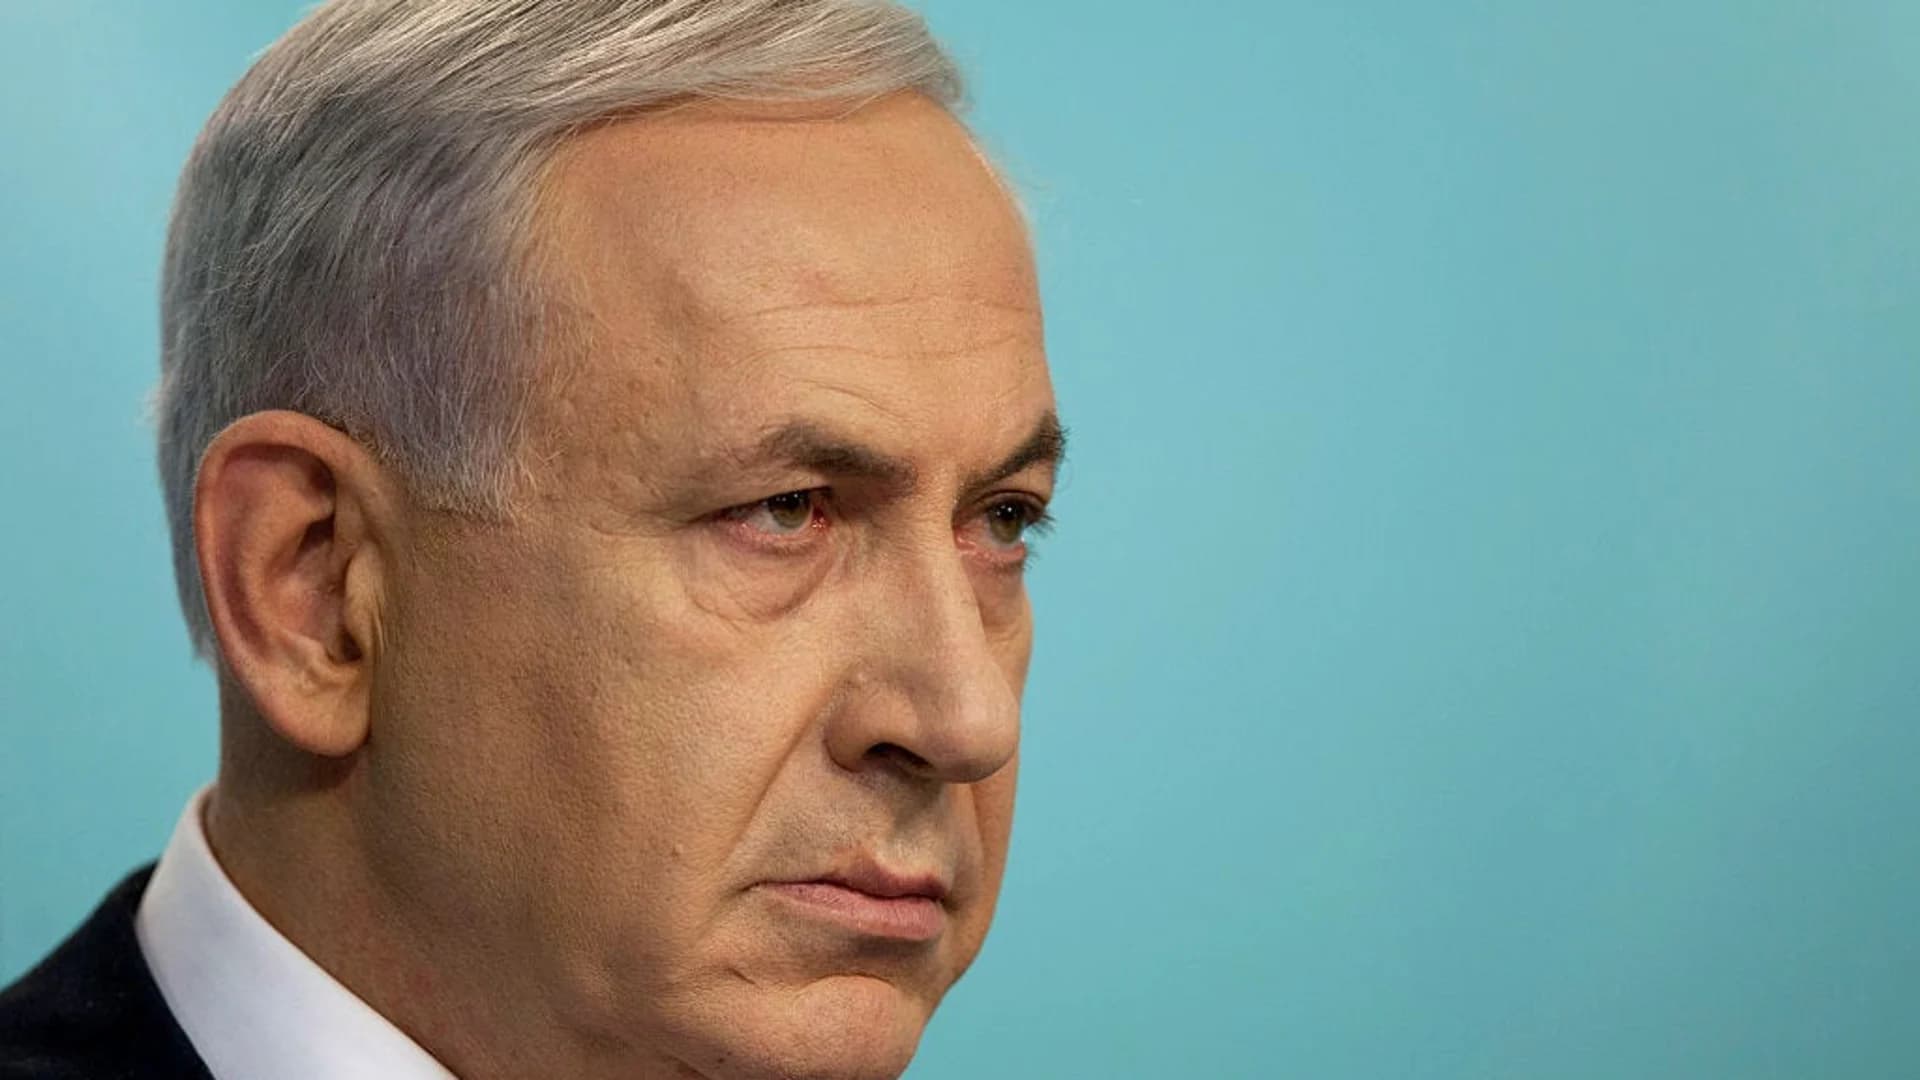 Israel attorney general recommends charges against Netanyahu